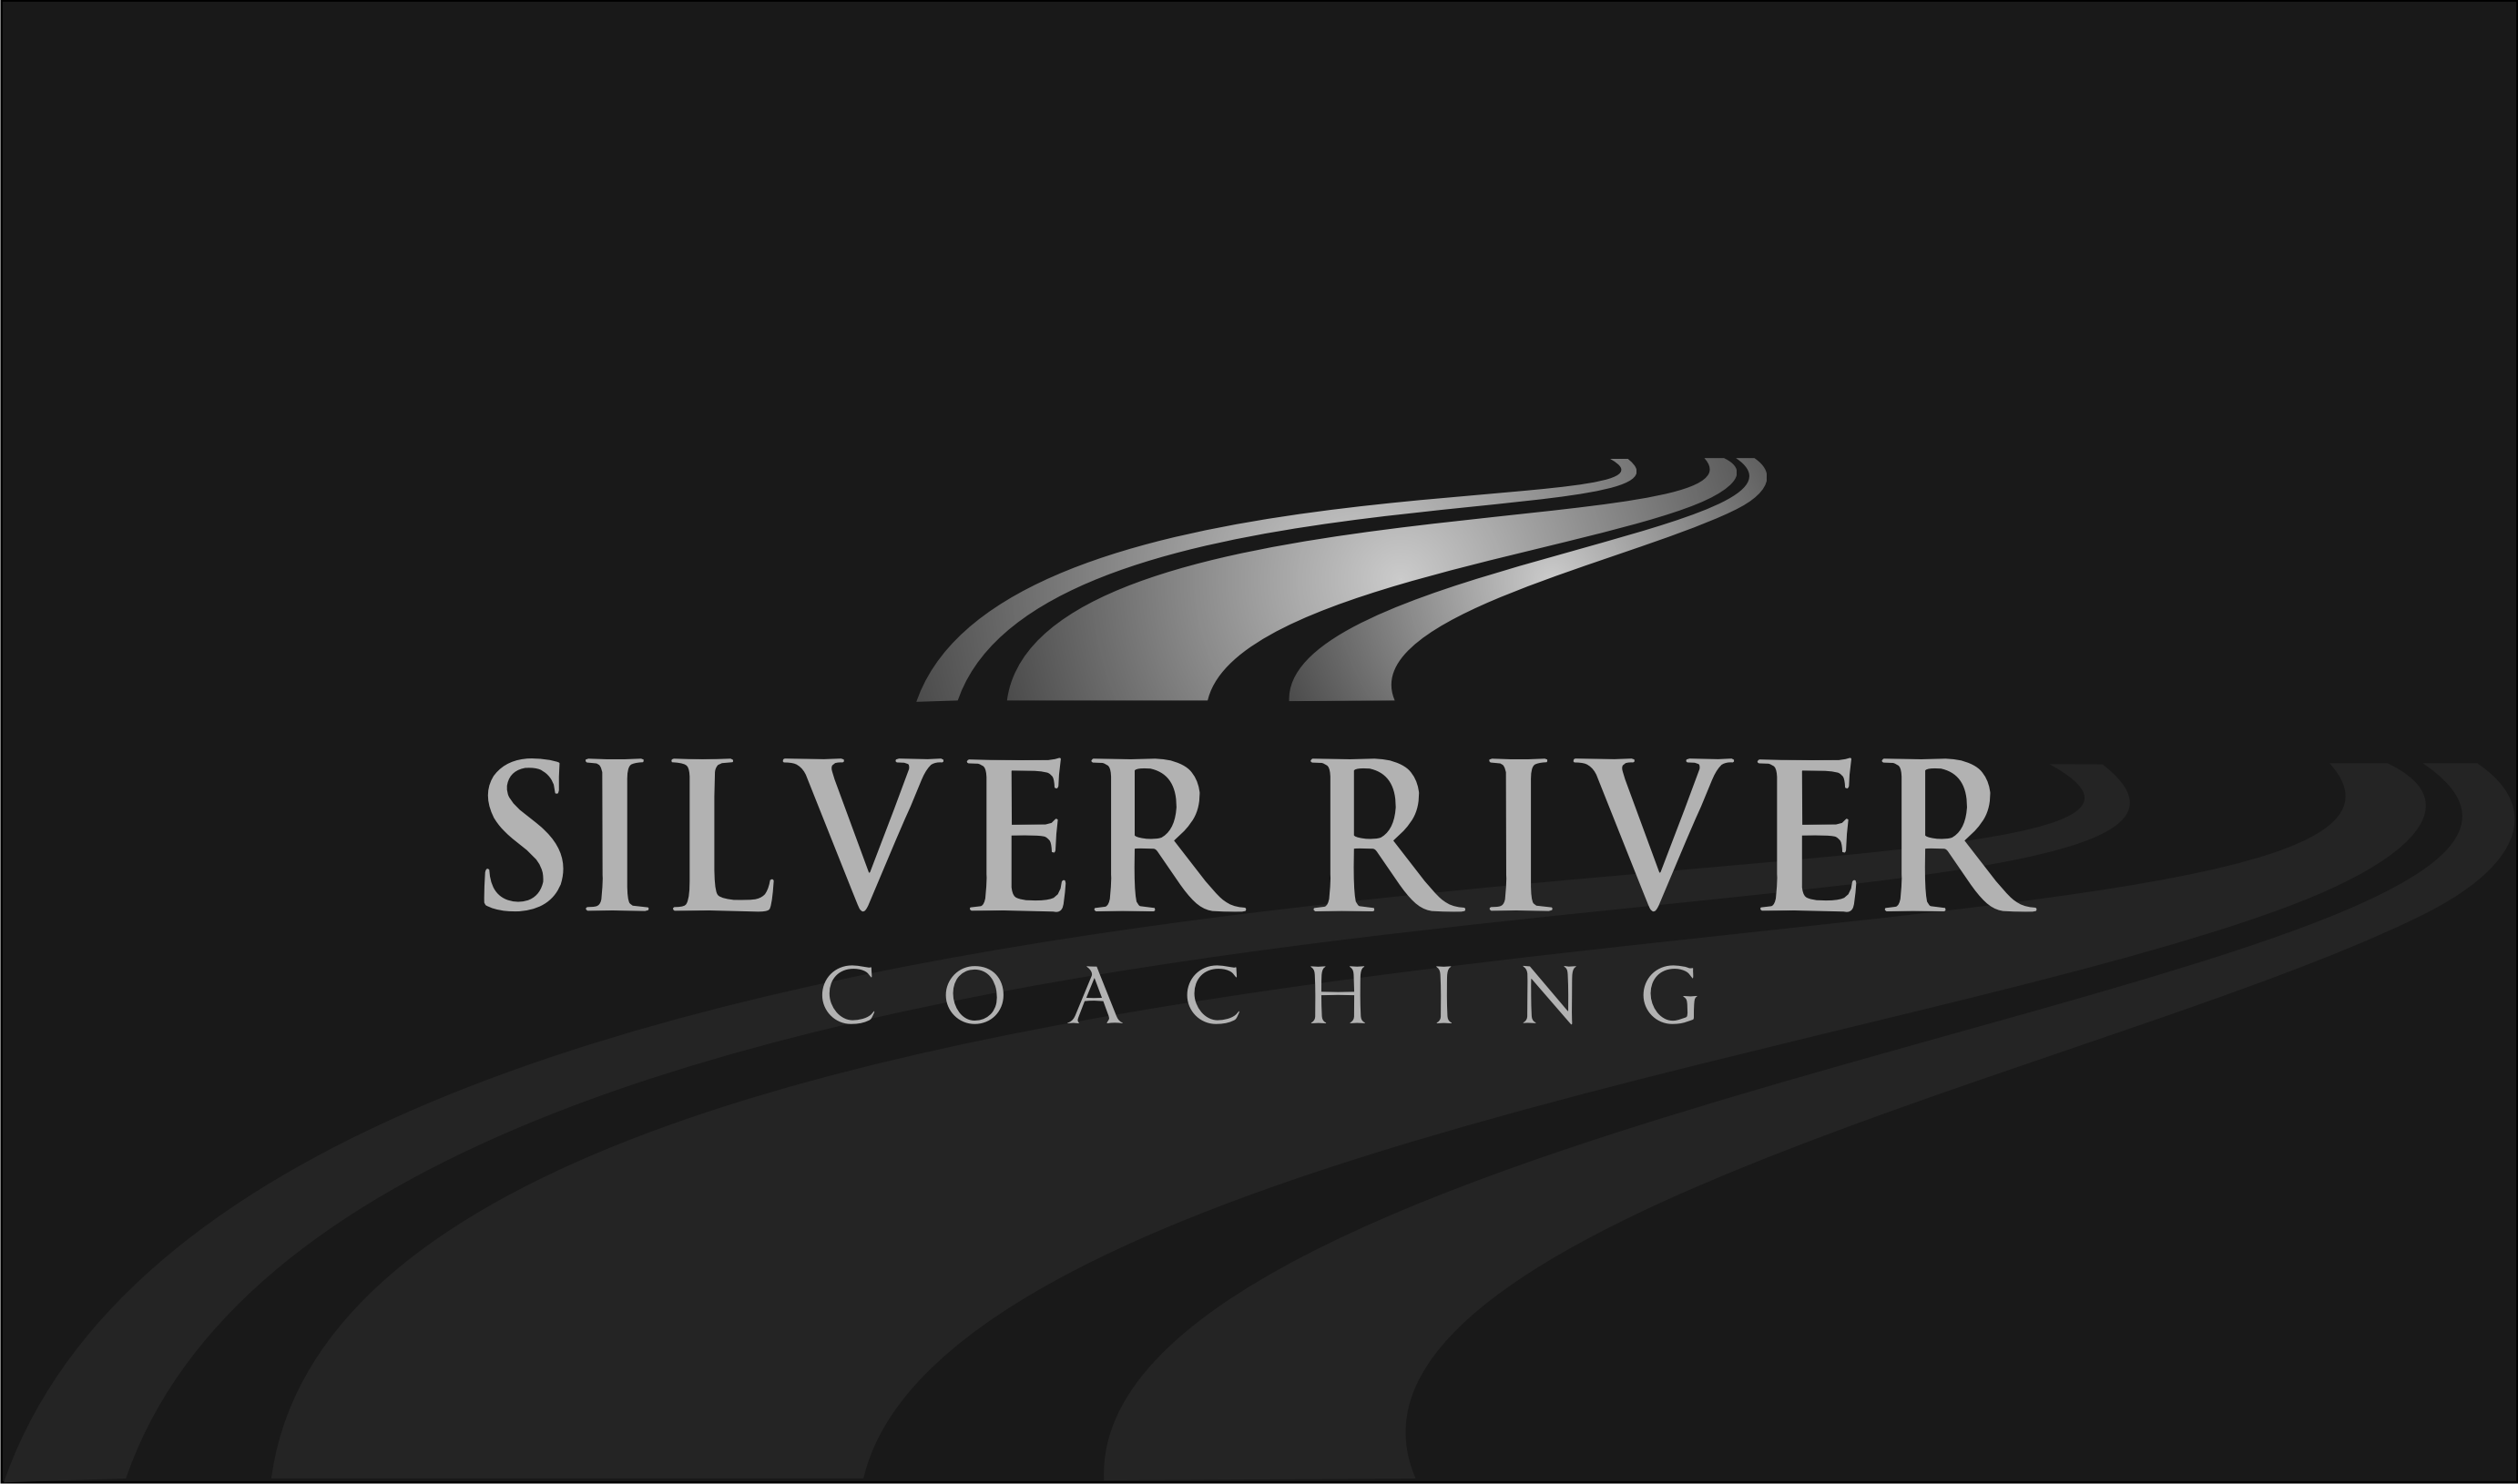 Silver Logo - Logo Design Needed for Exciting New Company Silver River Coaching